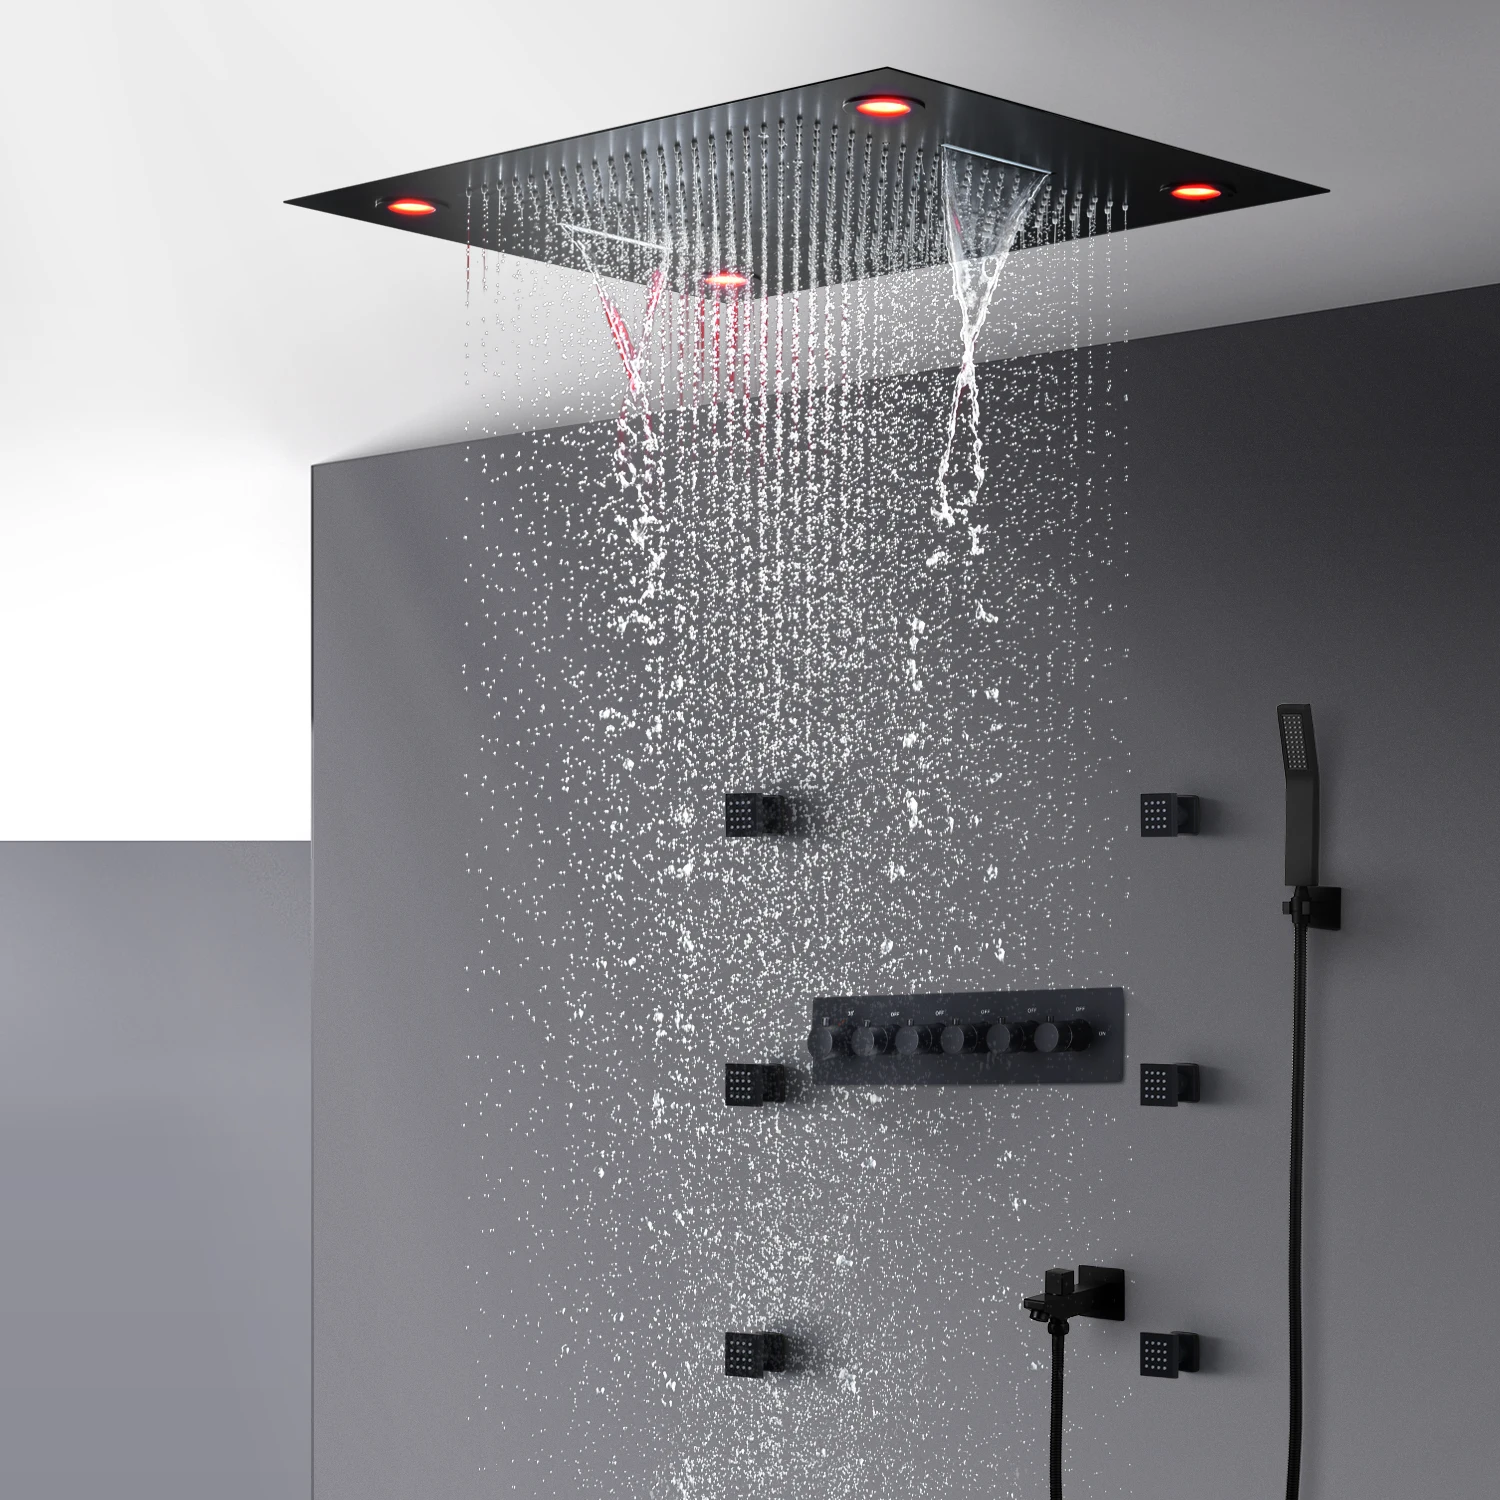 

hm Bathroom Matt Black Shower Set Thermostatic Faucets System Concealed Ceiling Large Rain Waterfall LED ShowerHead Panel